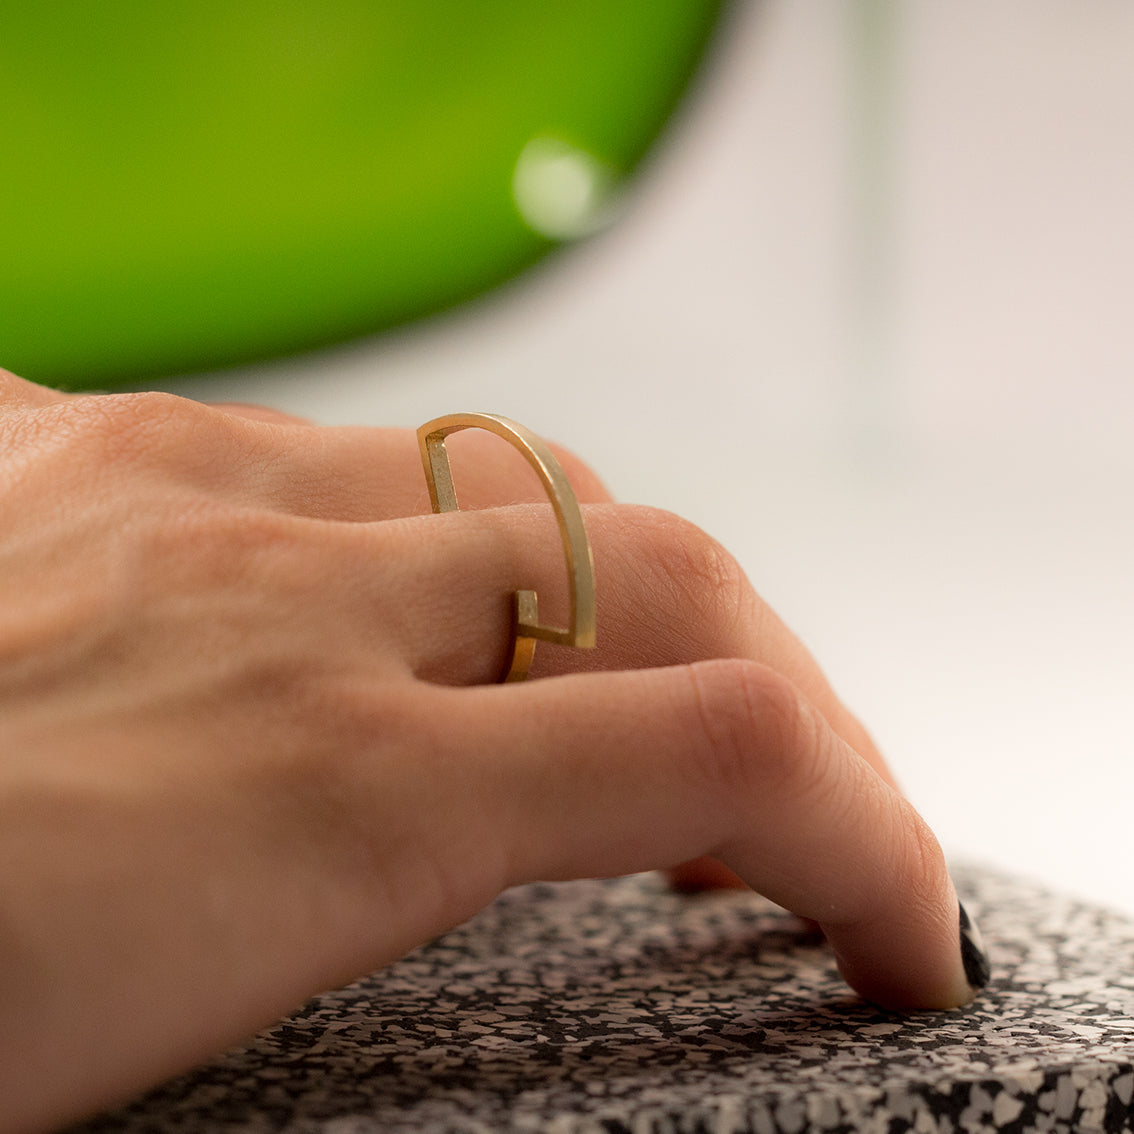 A photo of a right hand from the back with a minimal, geometric brass ring on the ring finger. The hand is lightly laying on a white and grey speckled black rubber surface – a rubber flooring sample for gyms. There is also a green shiny object in the background which makes the photo obtain a very joyful vibe.  The statement ring with sharp edges is made of brushed brass and has a very thin band. It's designed as a silhouette that reminds a totem. It's very light, contemporary, playful yet an elegant design.